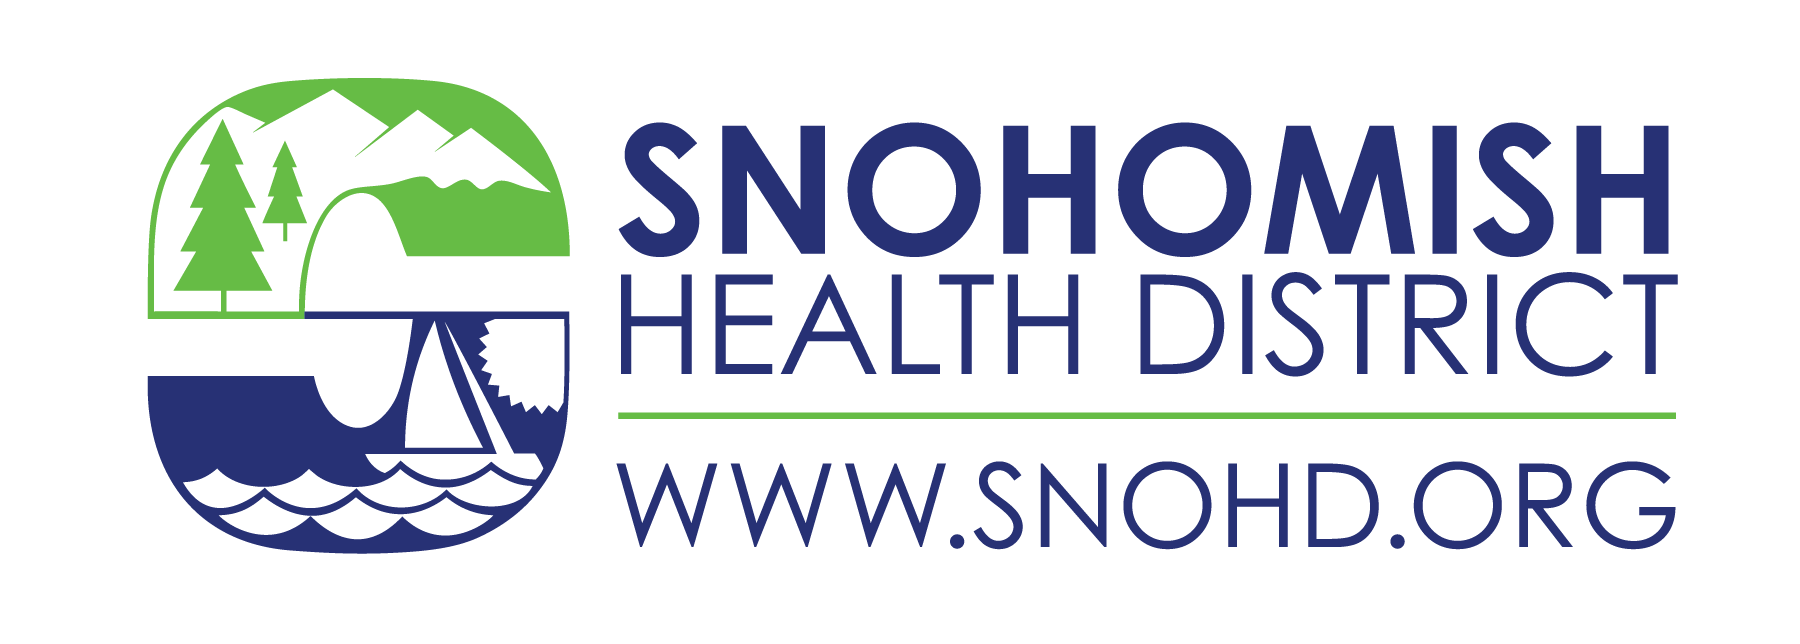 Snohomish Health District Vaccines - Special Populations Mobile Vaccine Clinic Logo